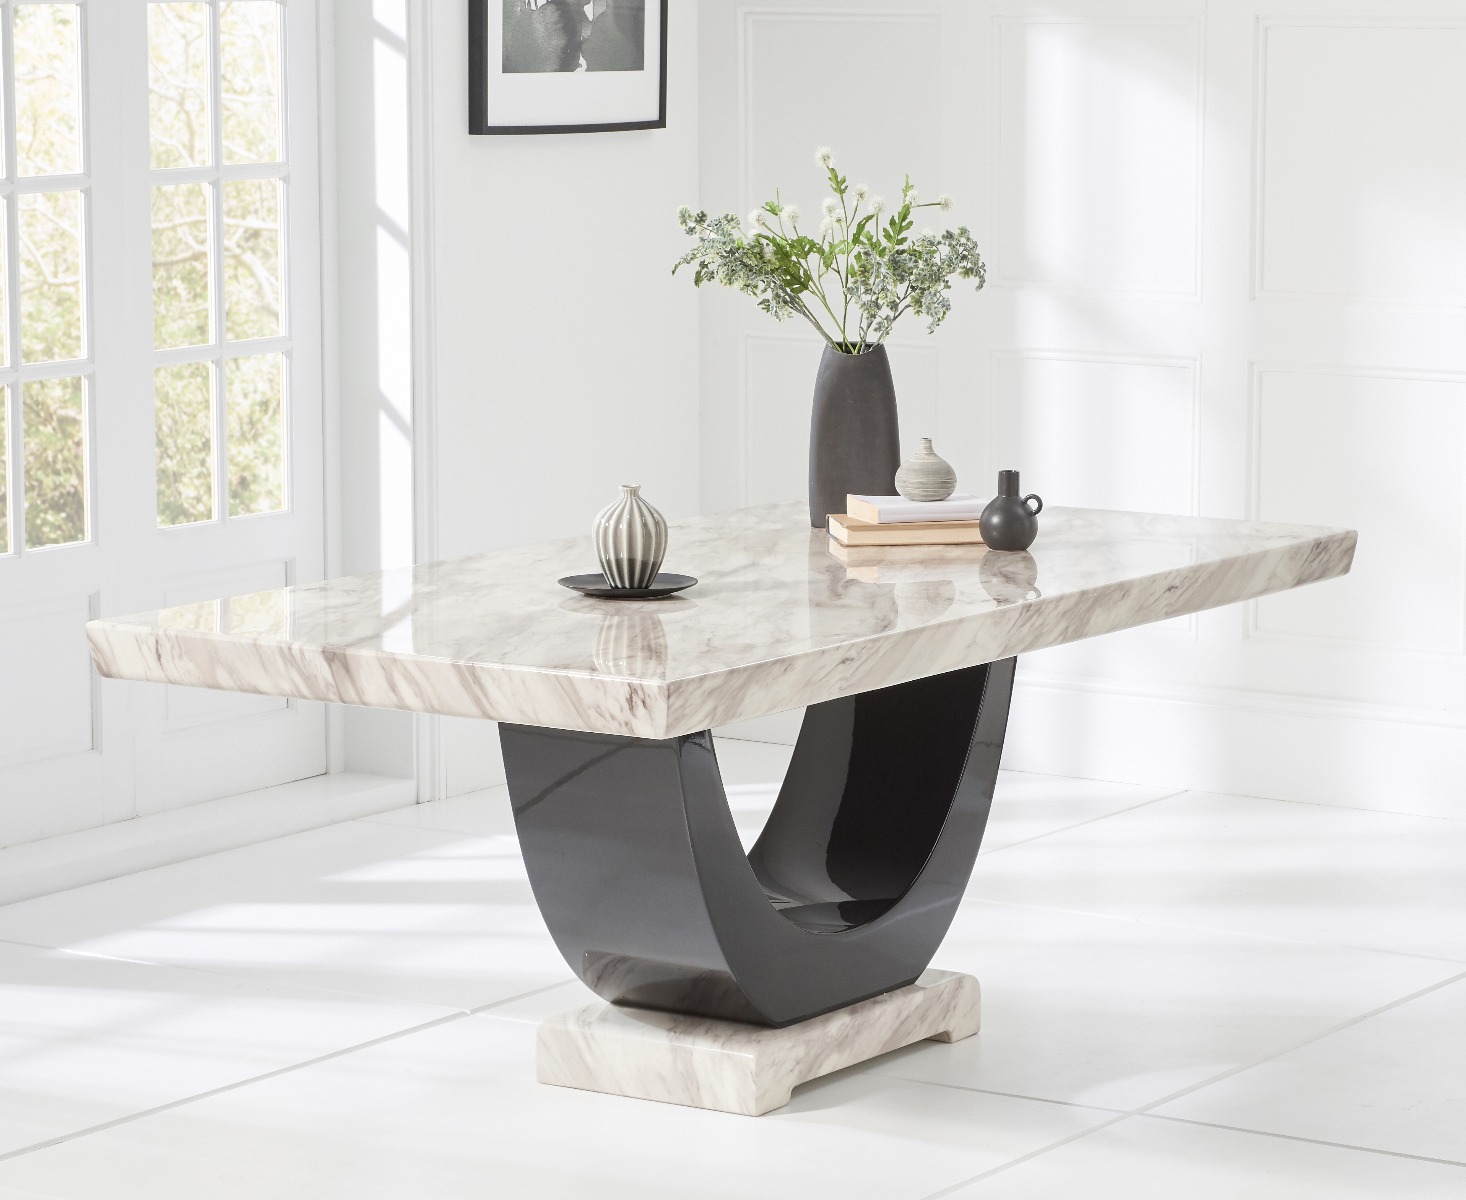 Photo 4 of Novara 200cm cream and black pedestal marble dining table with 12 grey sophia chairs